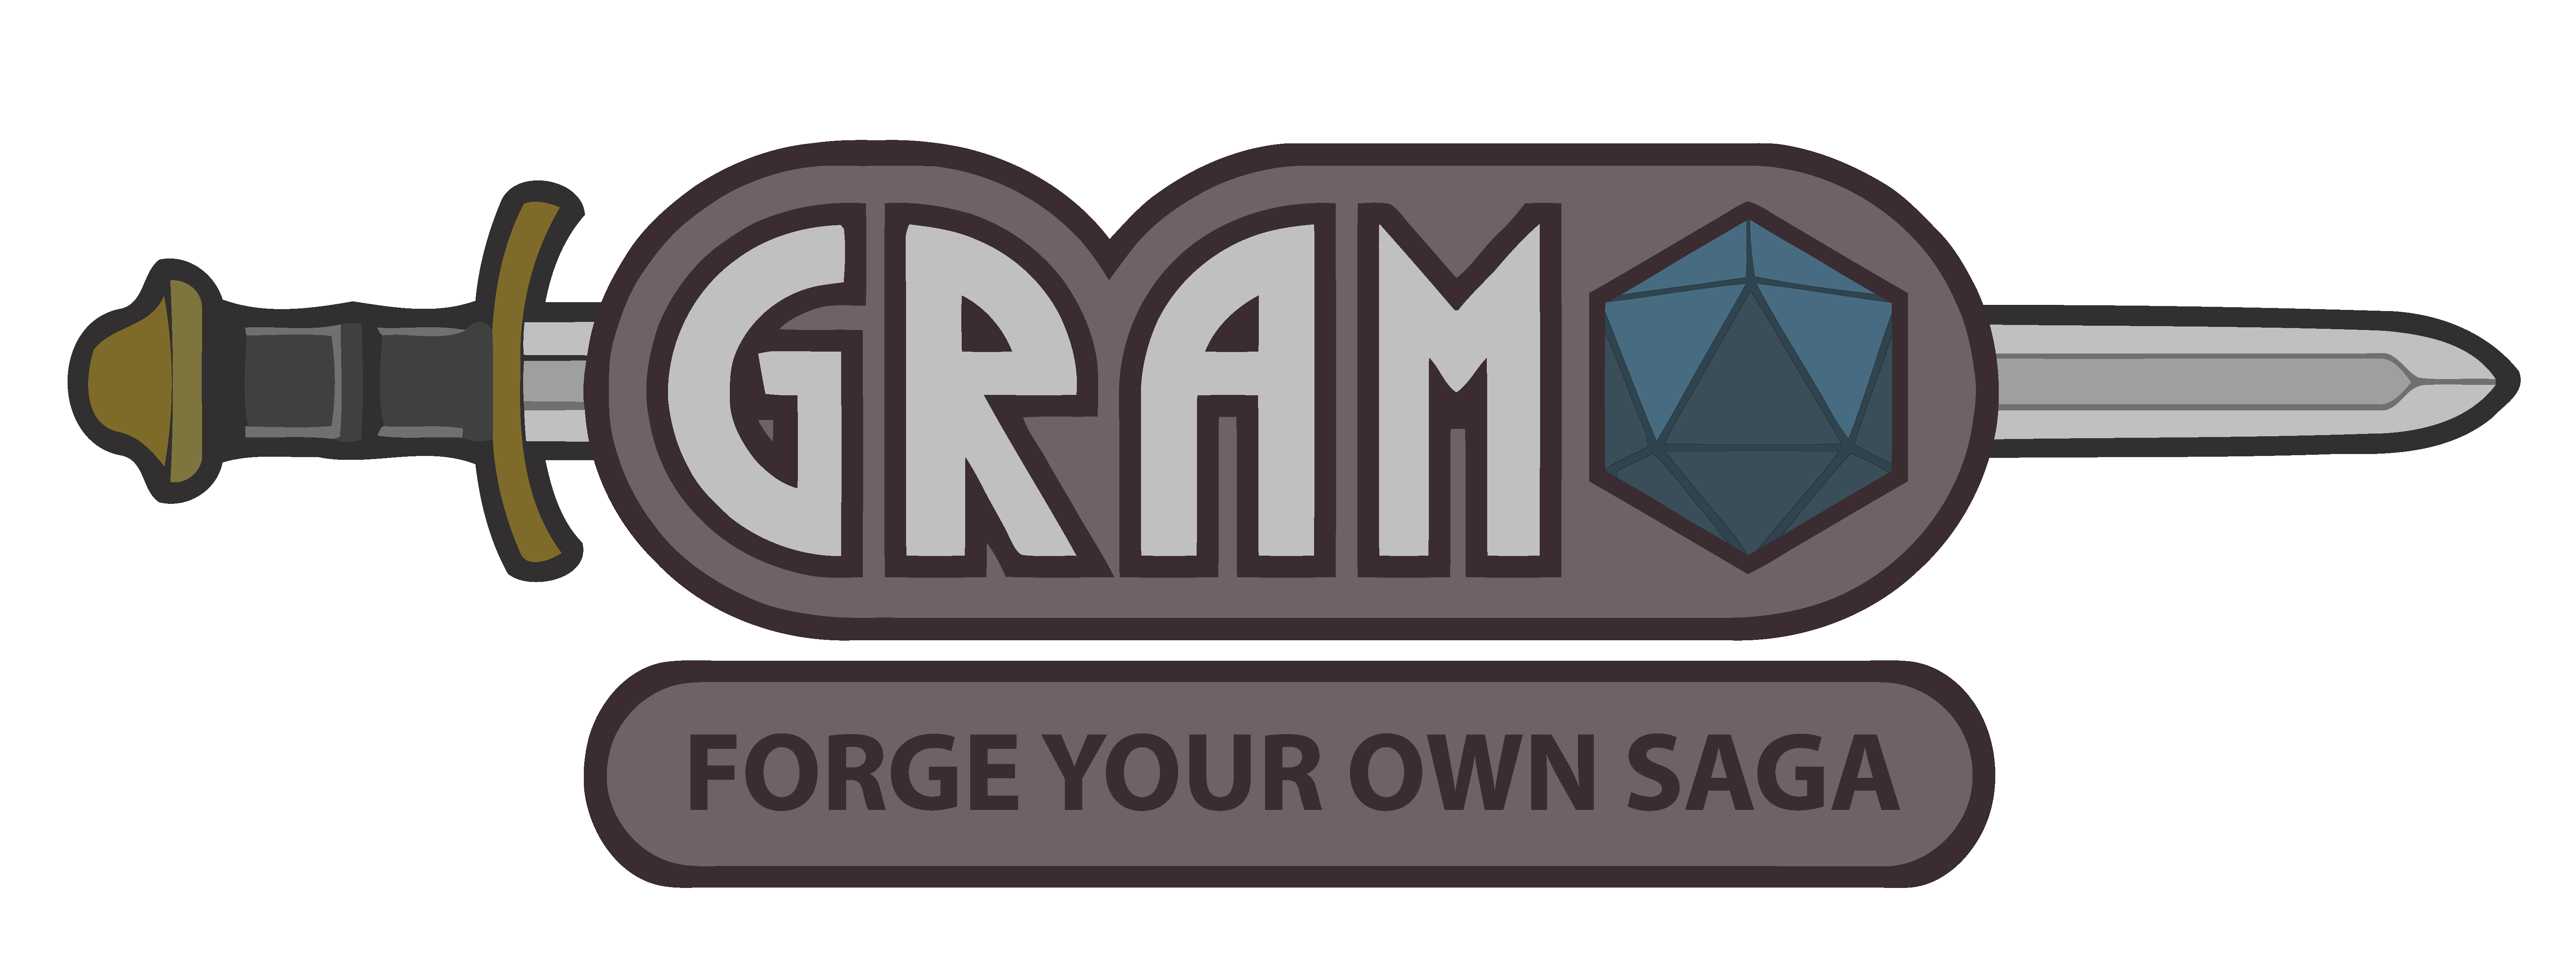 Gram Logo - Home | The GRAM Role-Playing Game